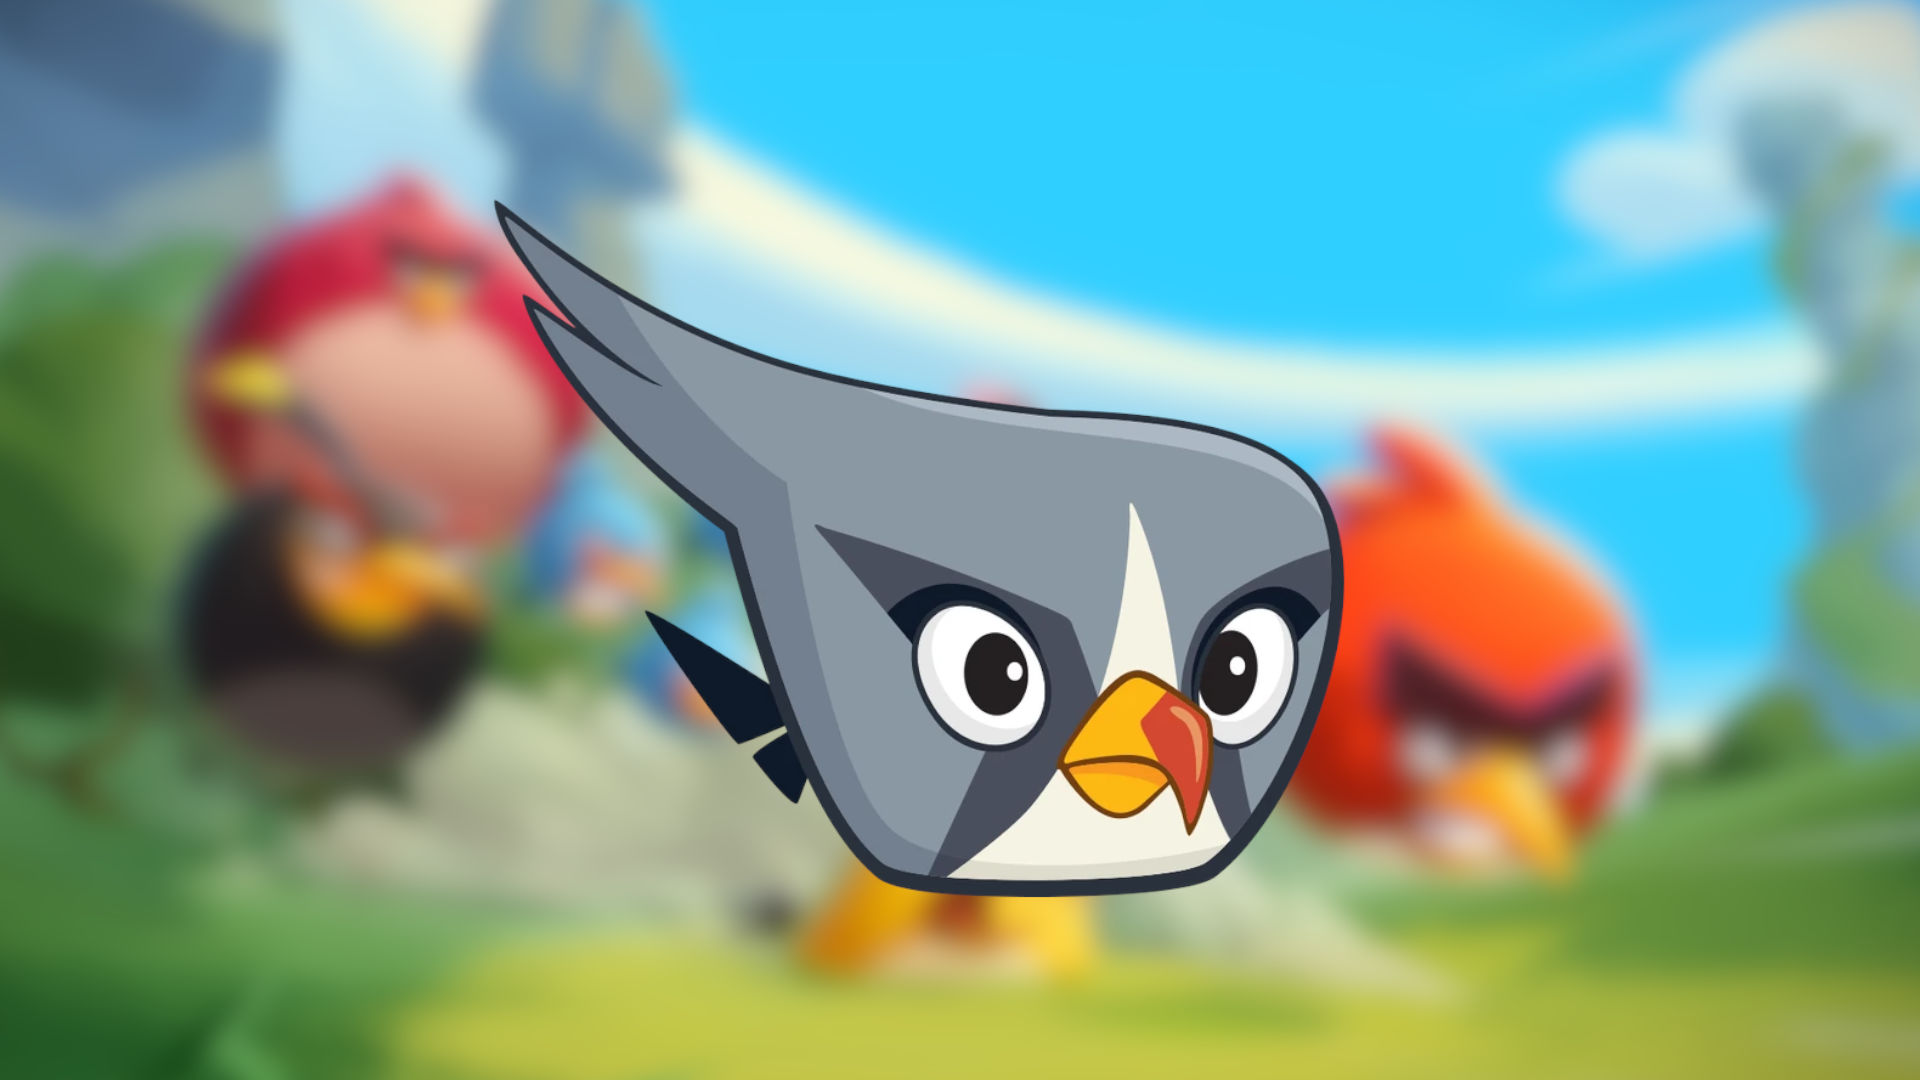 Angry Birds character Silver